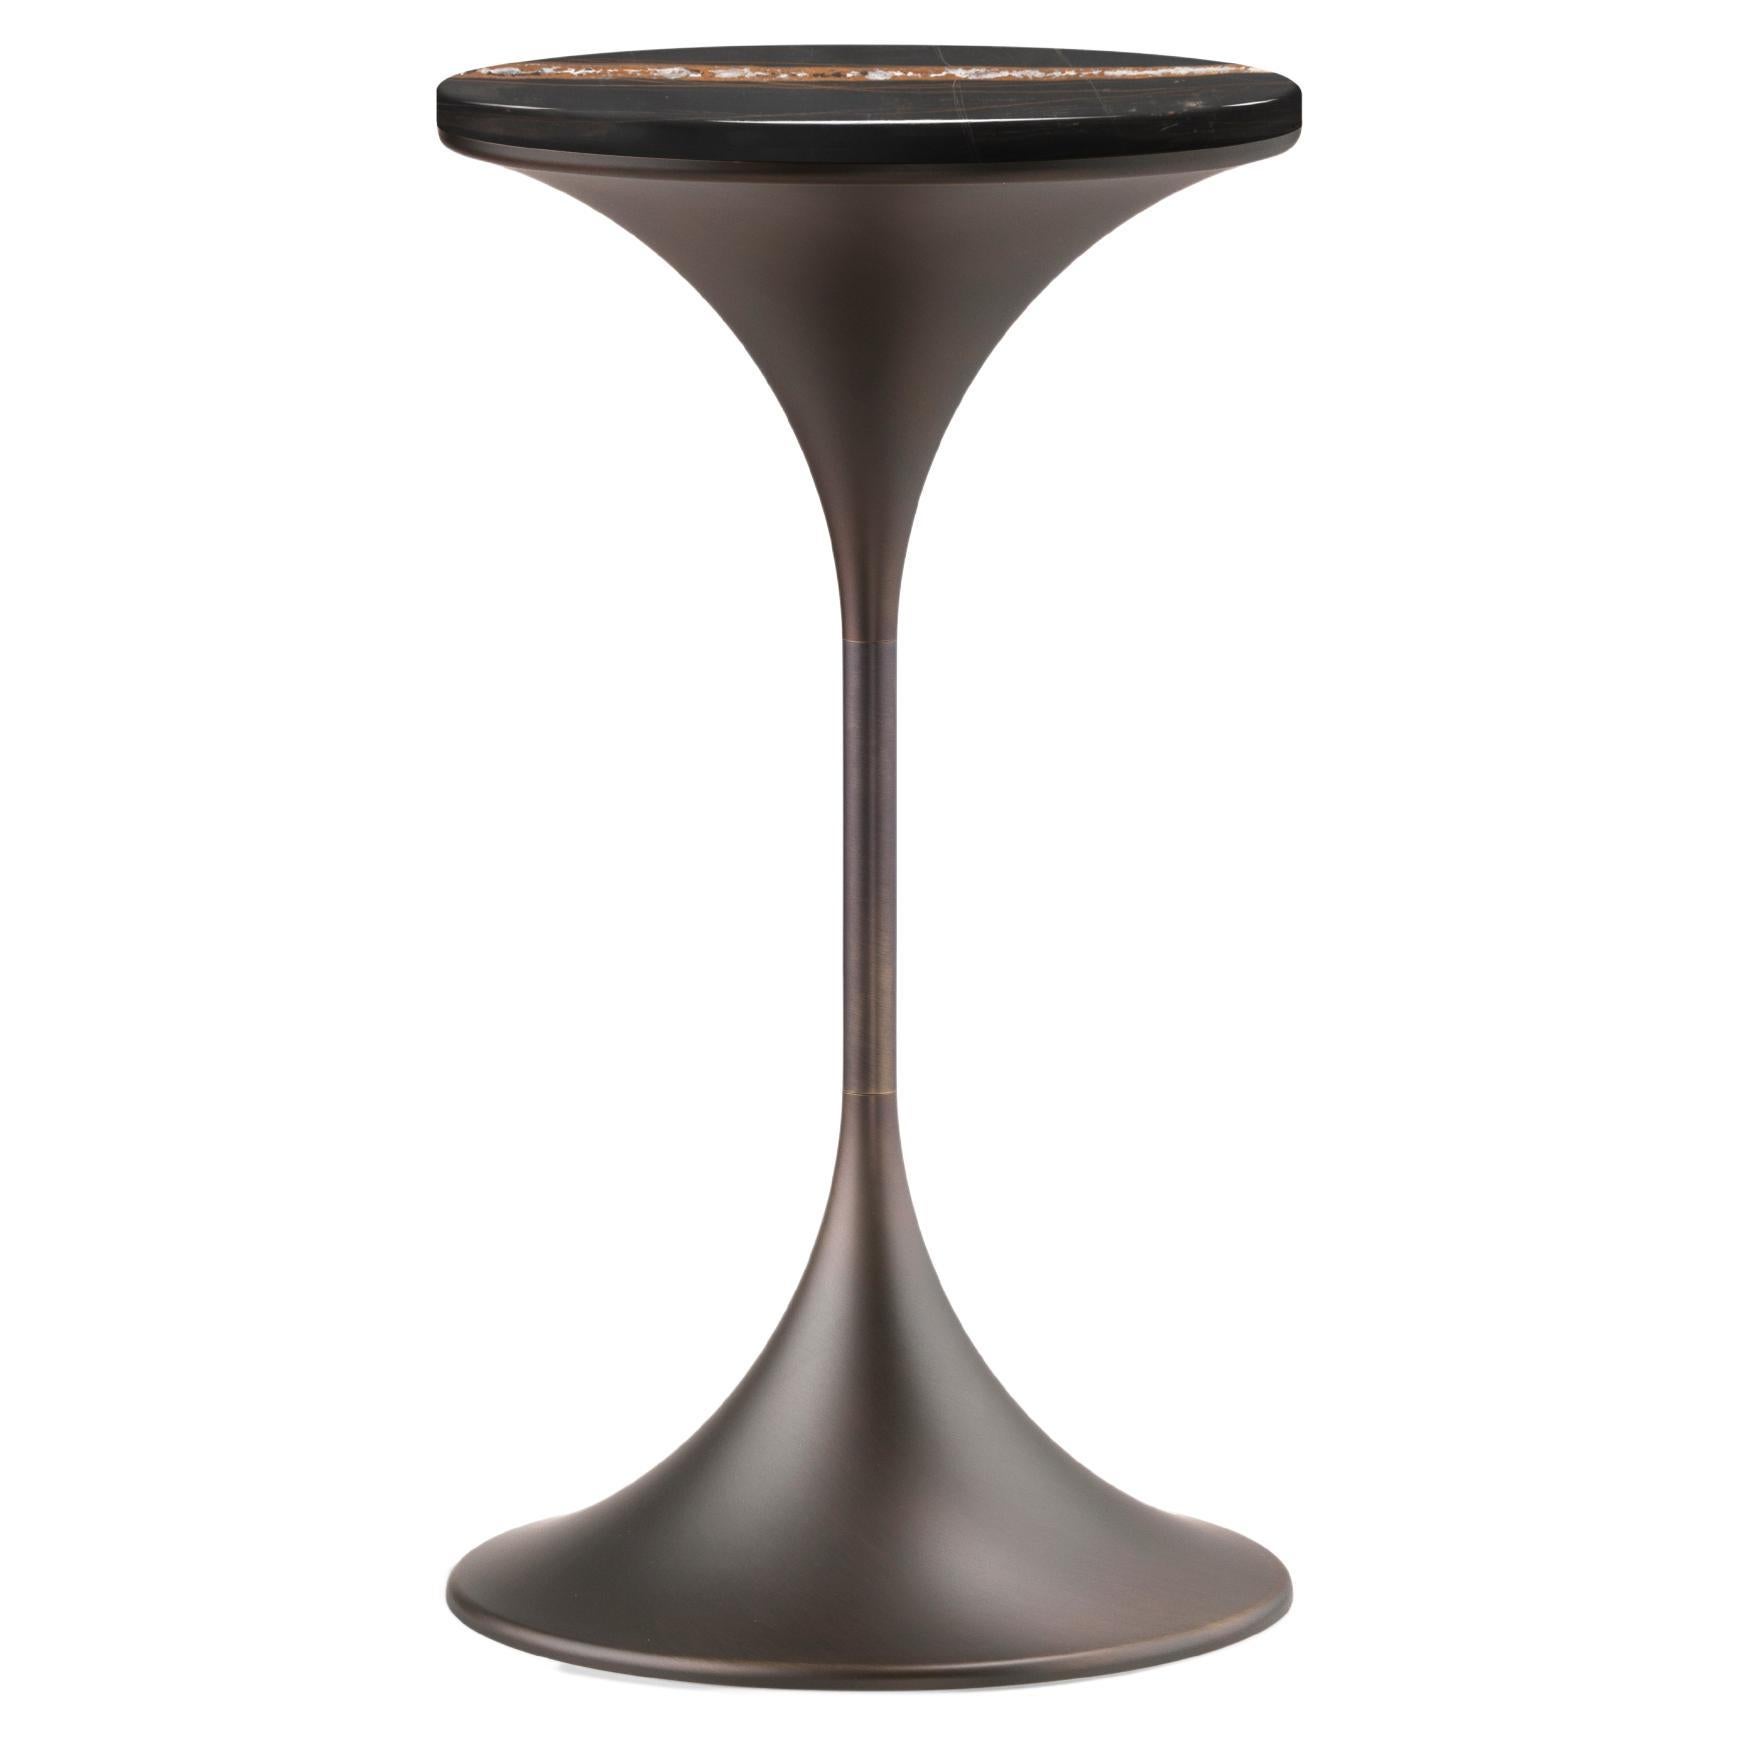 Dapertutto Tall Table, Sahara Noir Top, Burnished Brass , Made in Italy